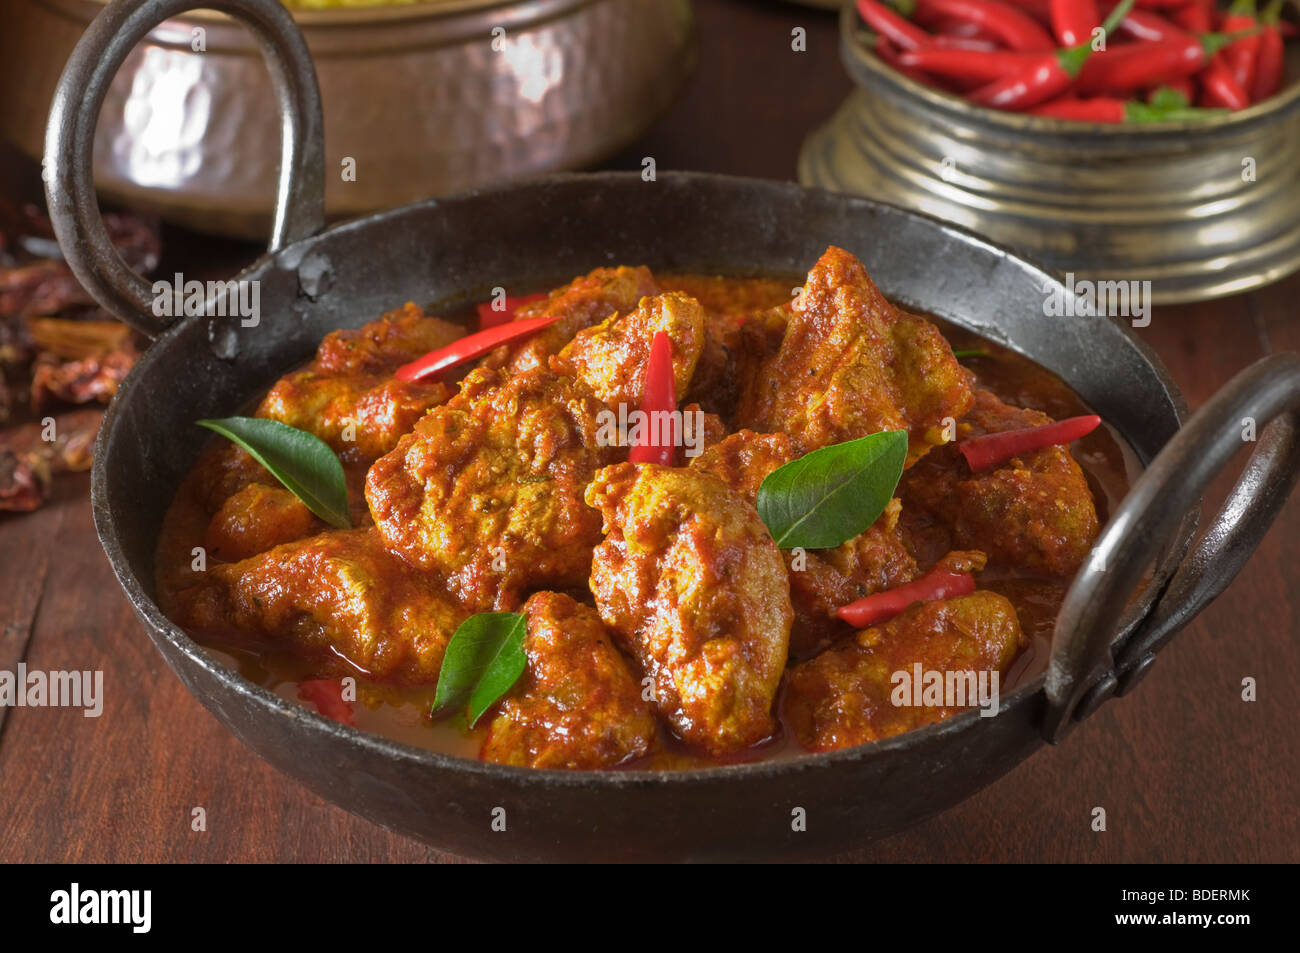 Chilli chicken curry India South Asia Food Stock Photo